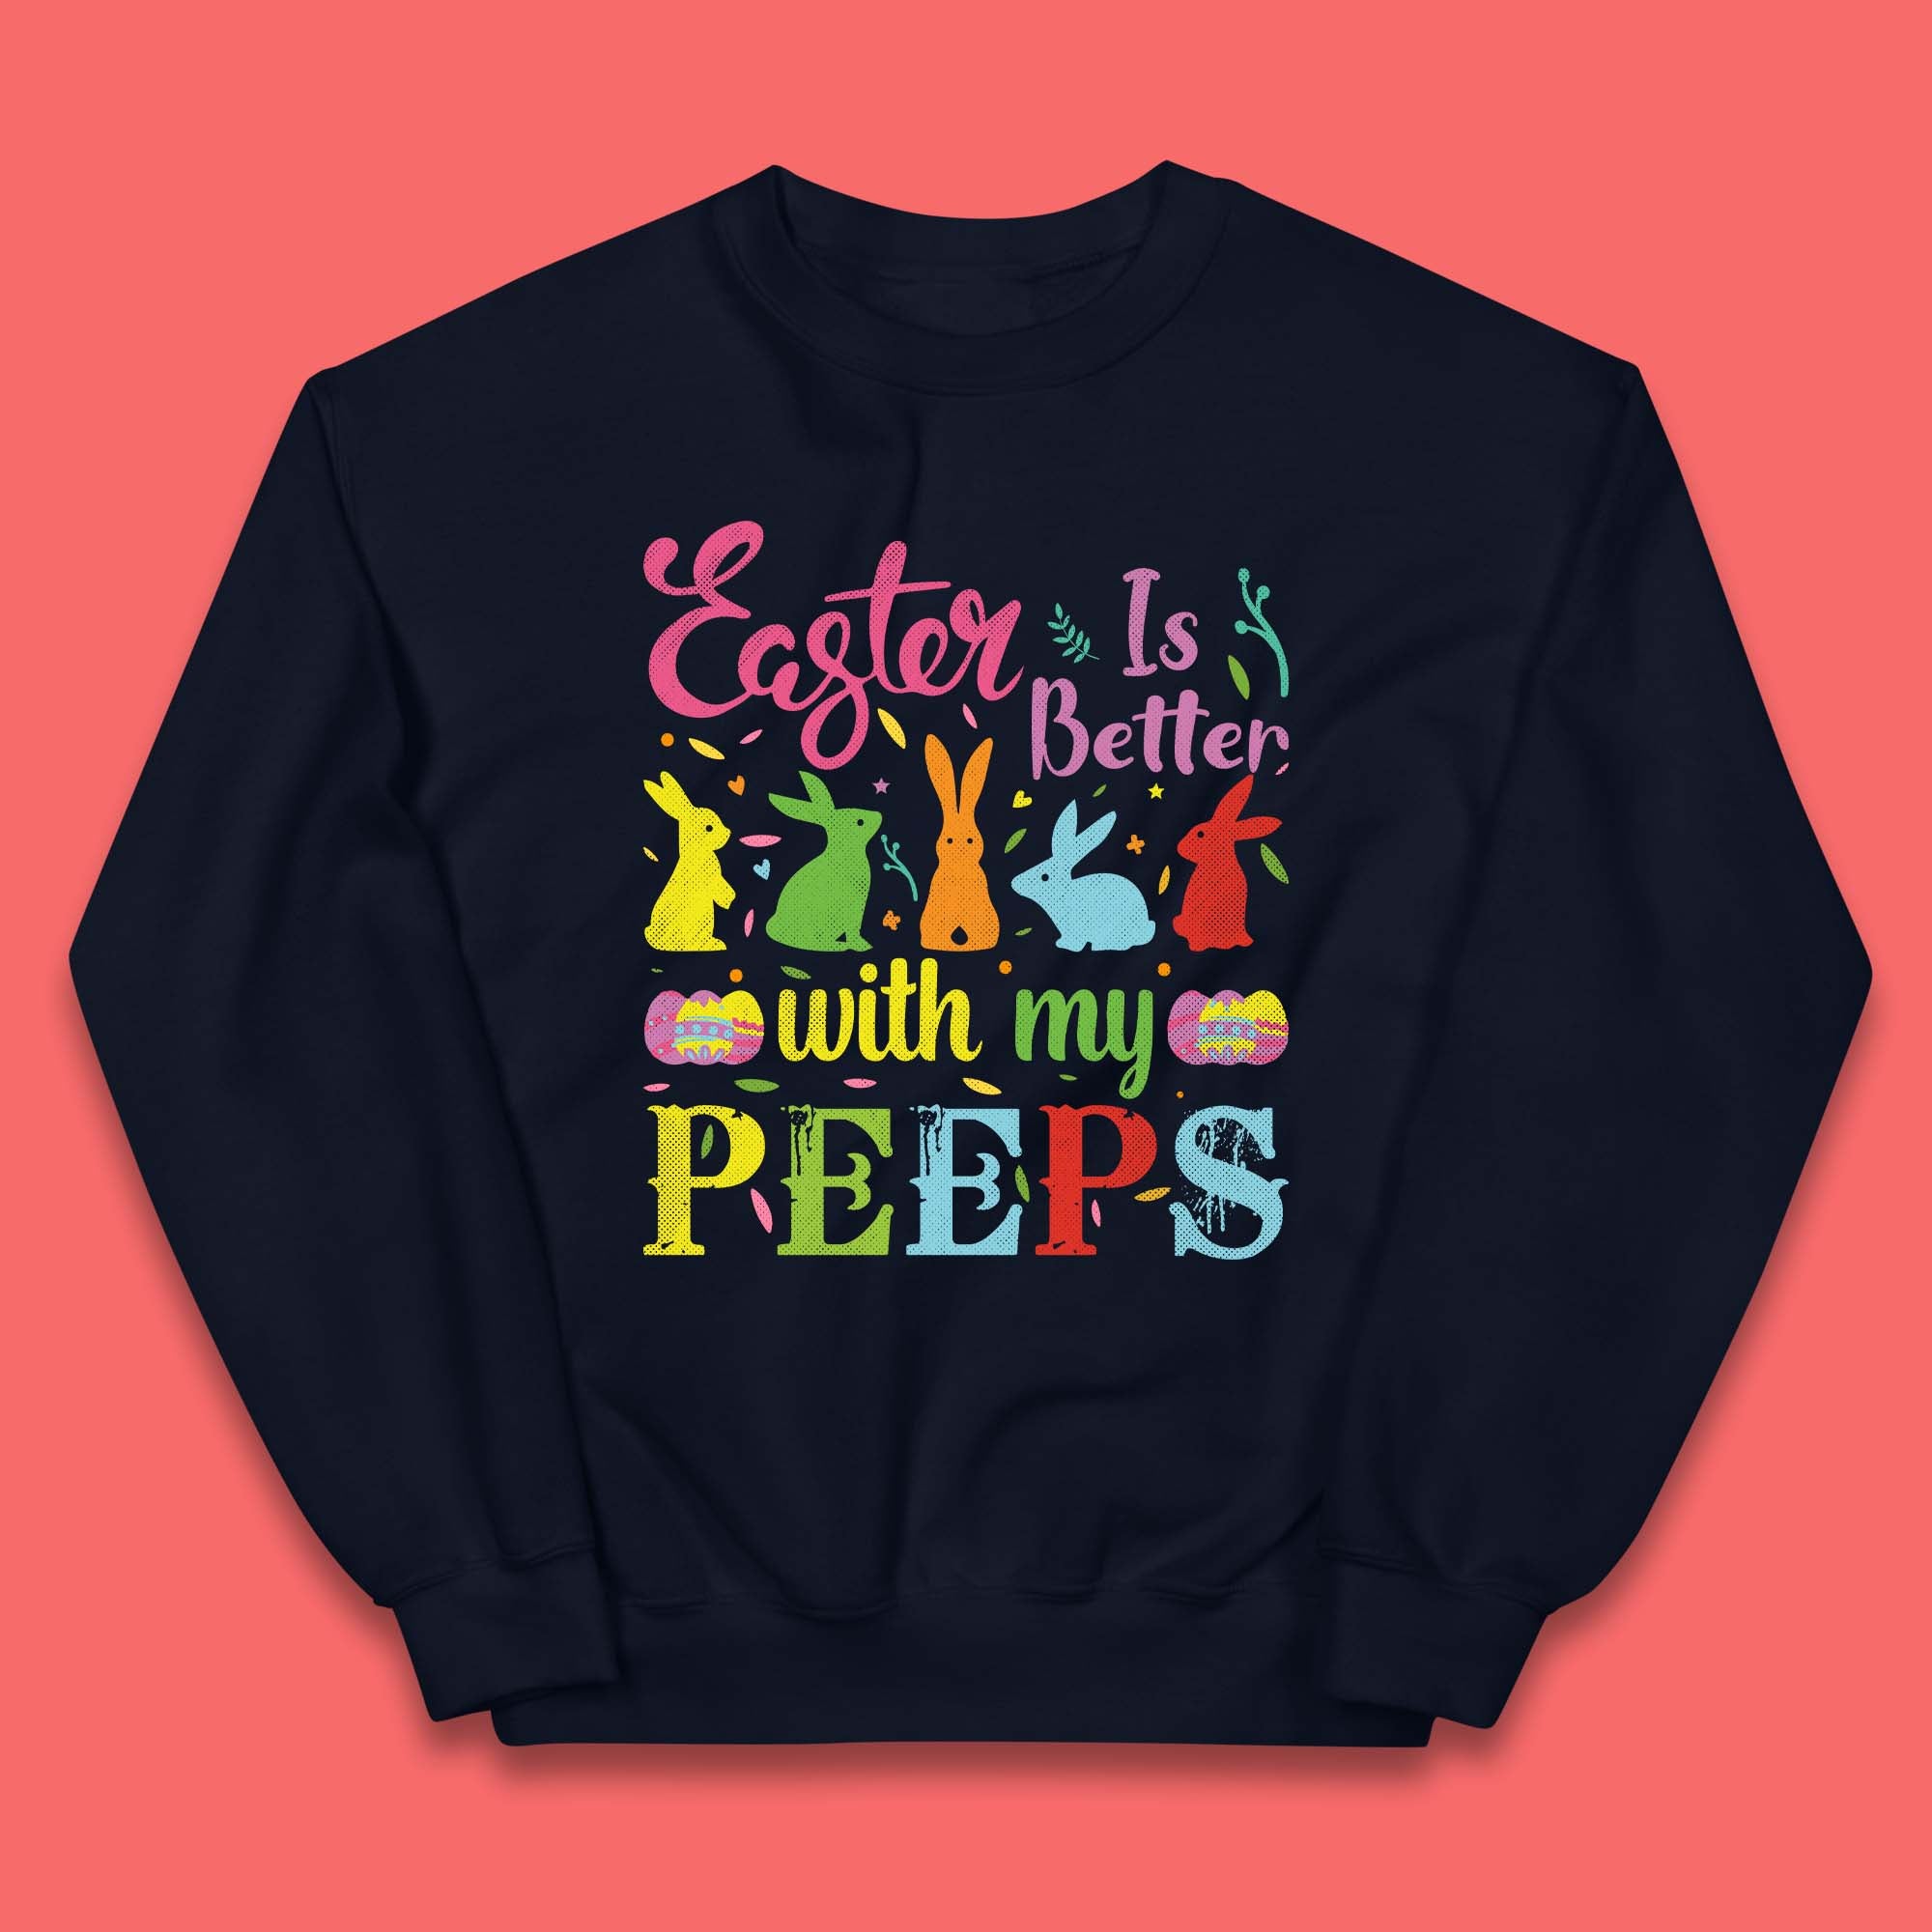 Easter Is Better With My Peeps Kids Jumper